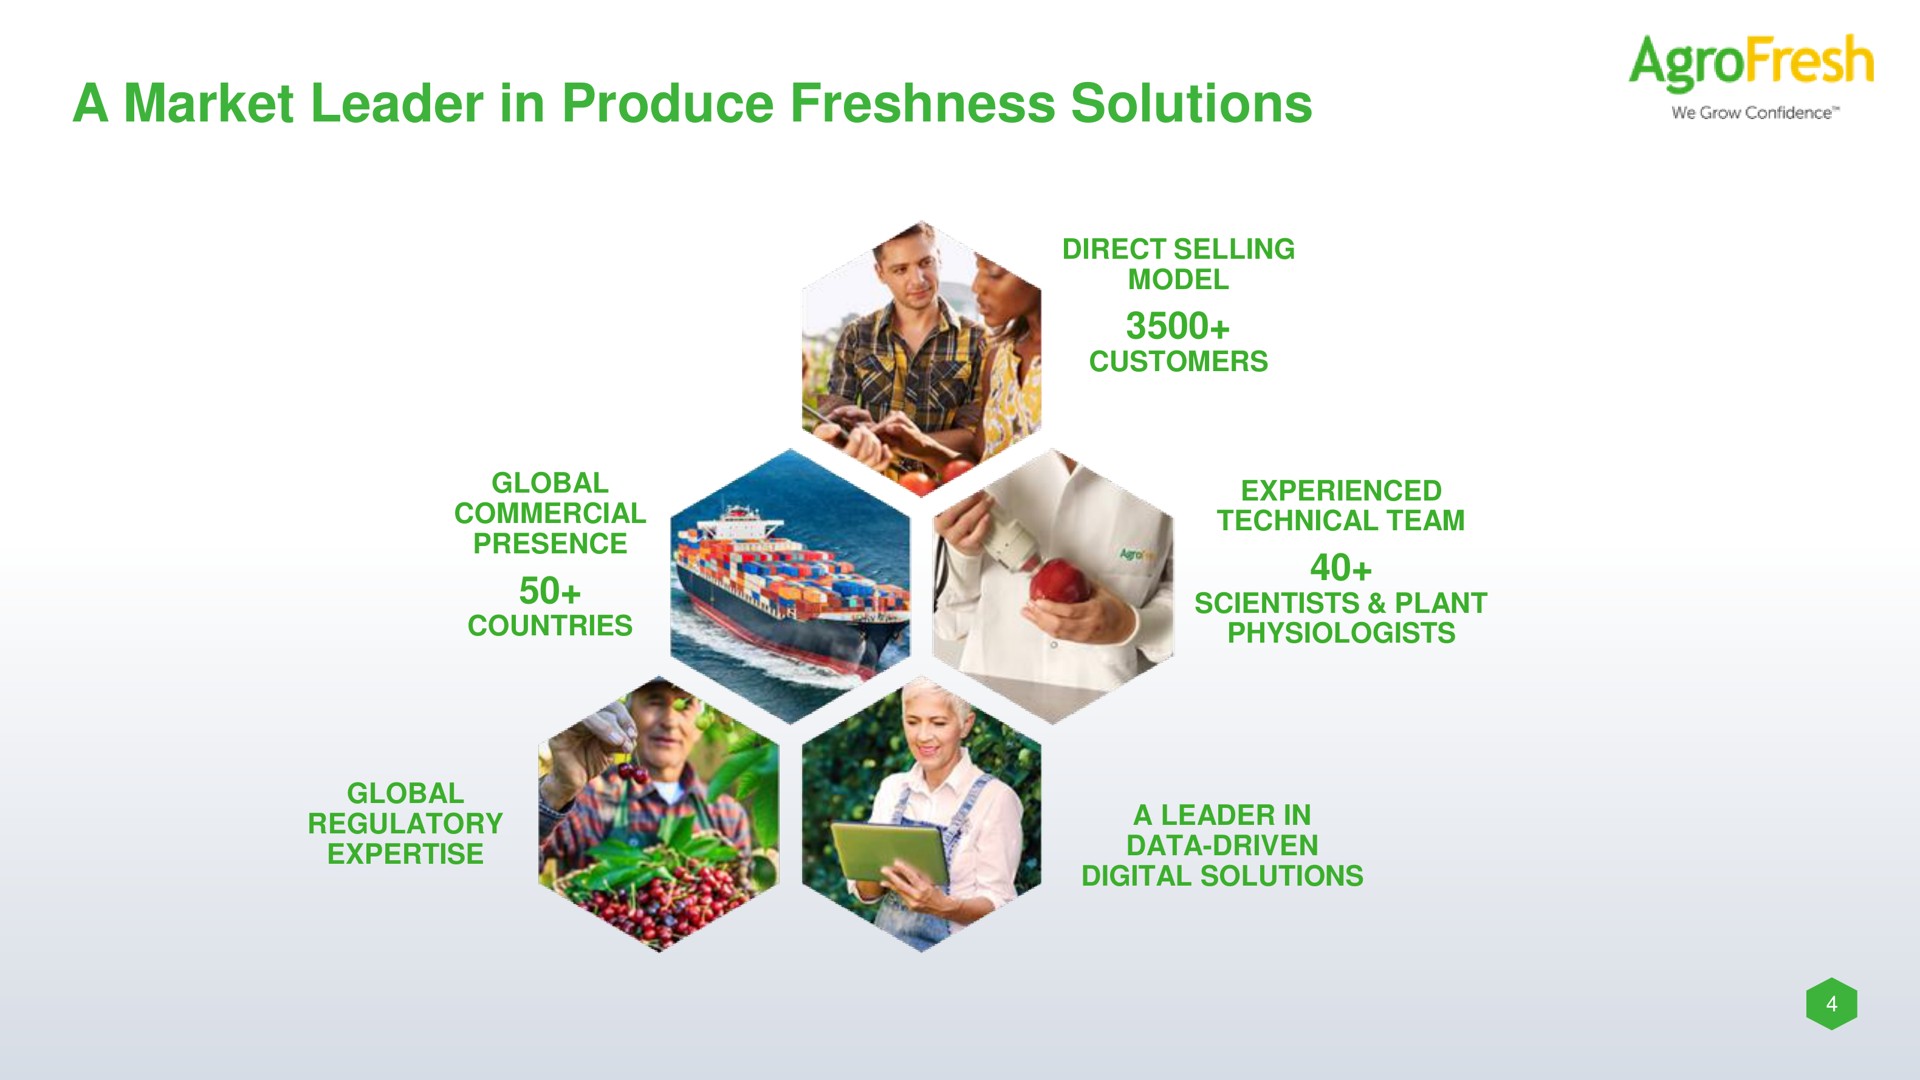 a market leader in produce freshness solutions by or | AgroFresh